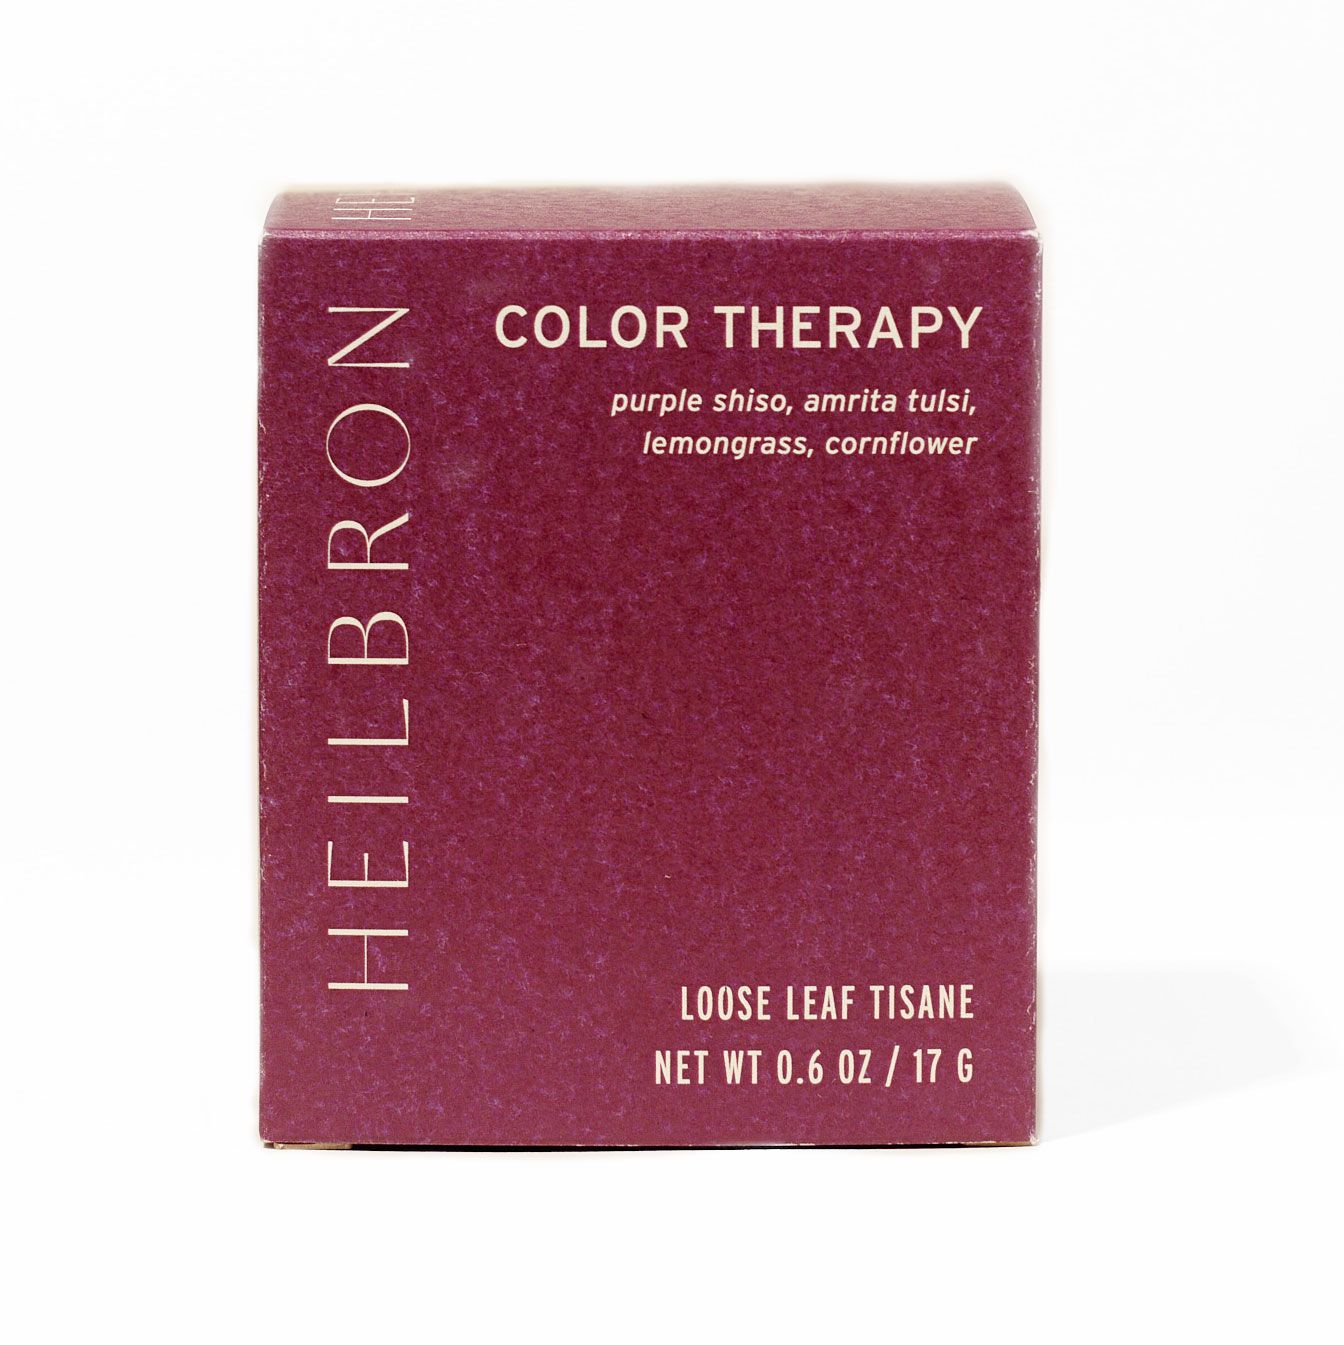 A red-purple box that reads 'Color Therapy' with loose leaf tea inside.